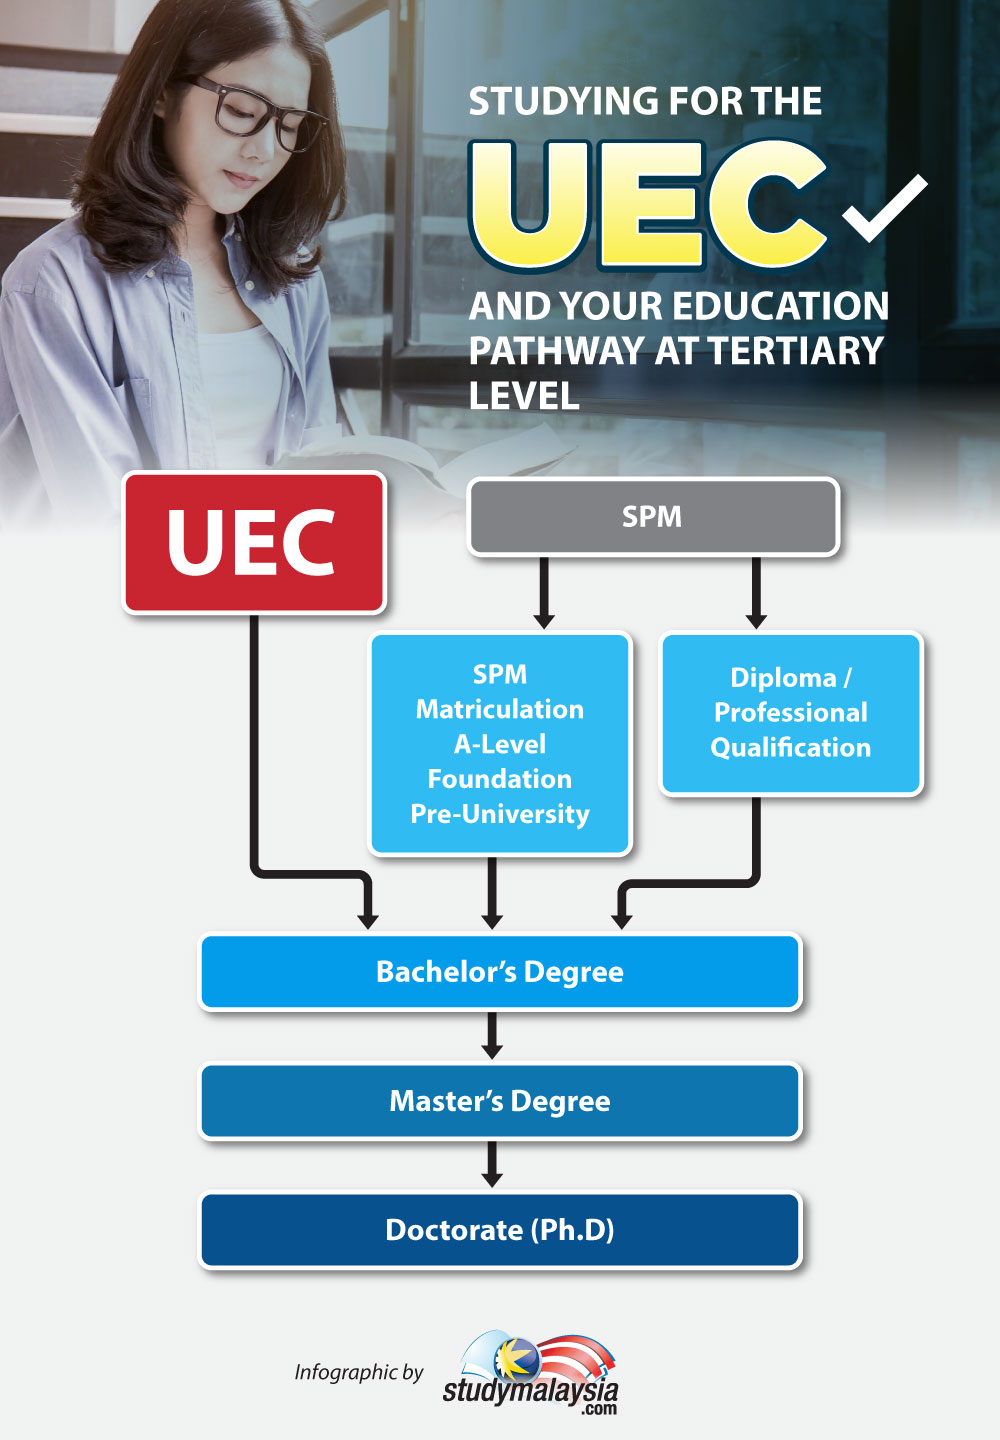 Studying for the UEC and your education pathway at tertiary